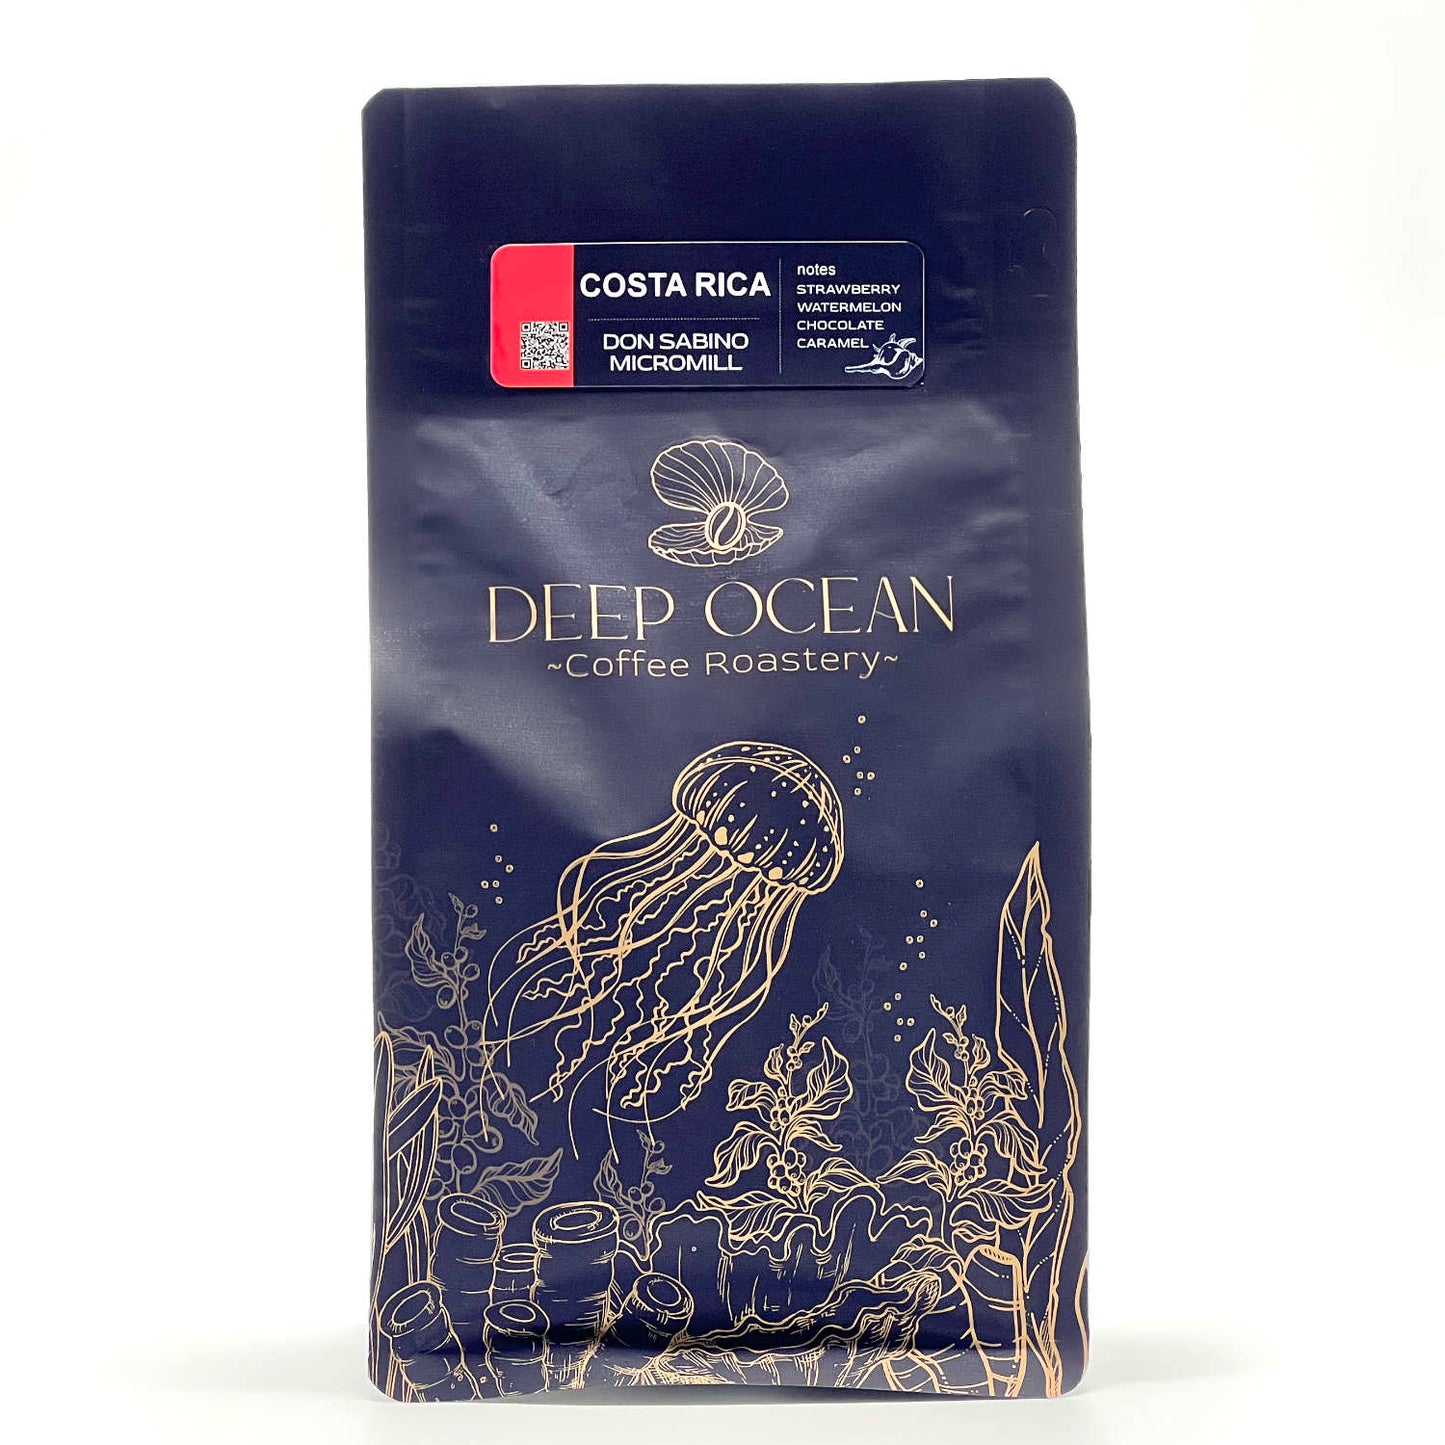 variant 1 - medium roasted coffee Costa Rica is great choice of specialty coffee.